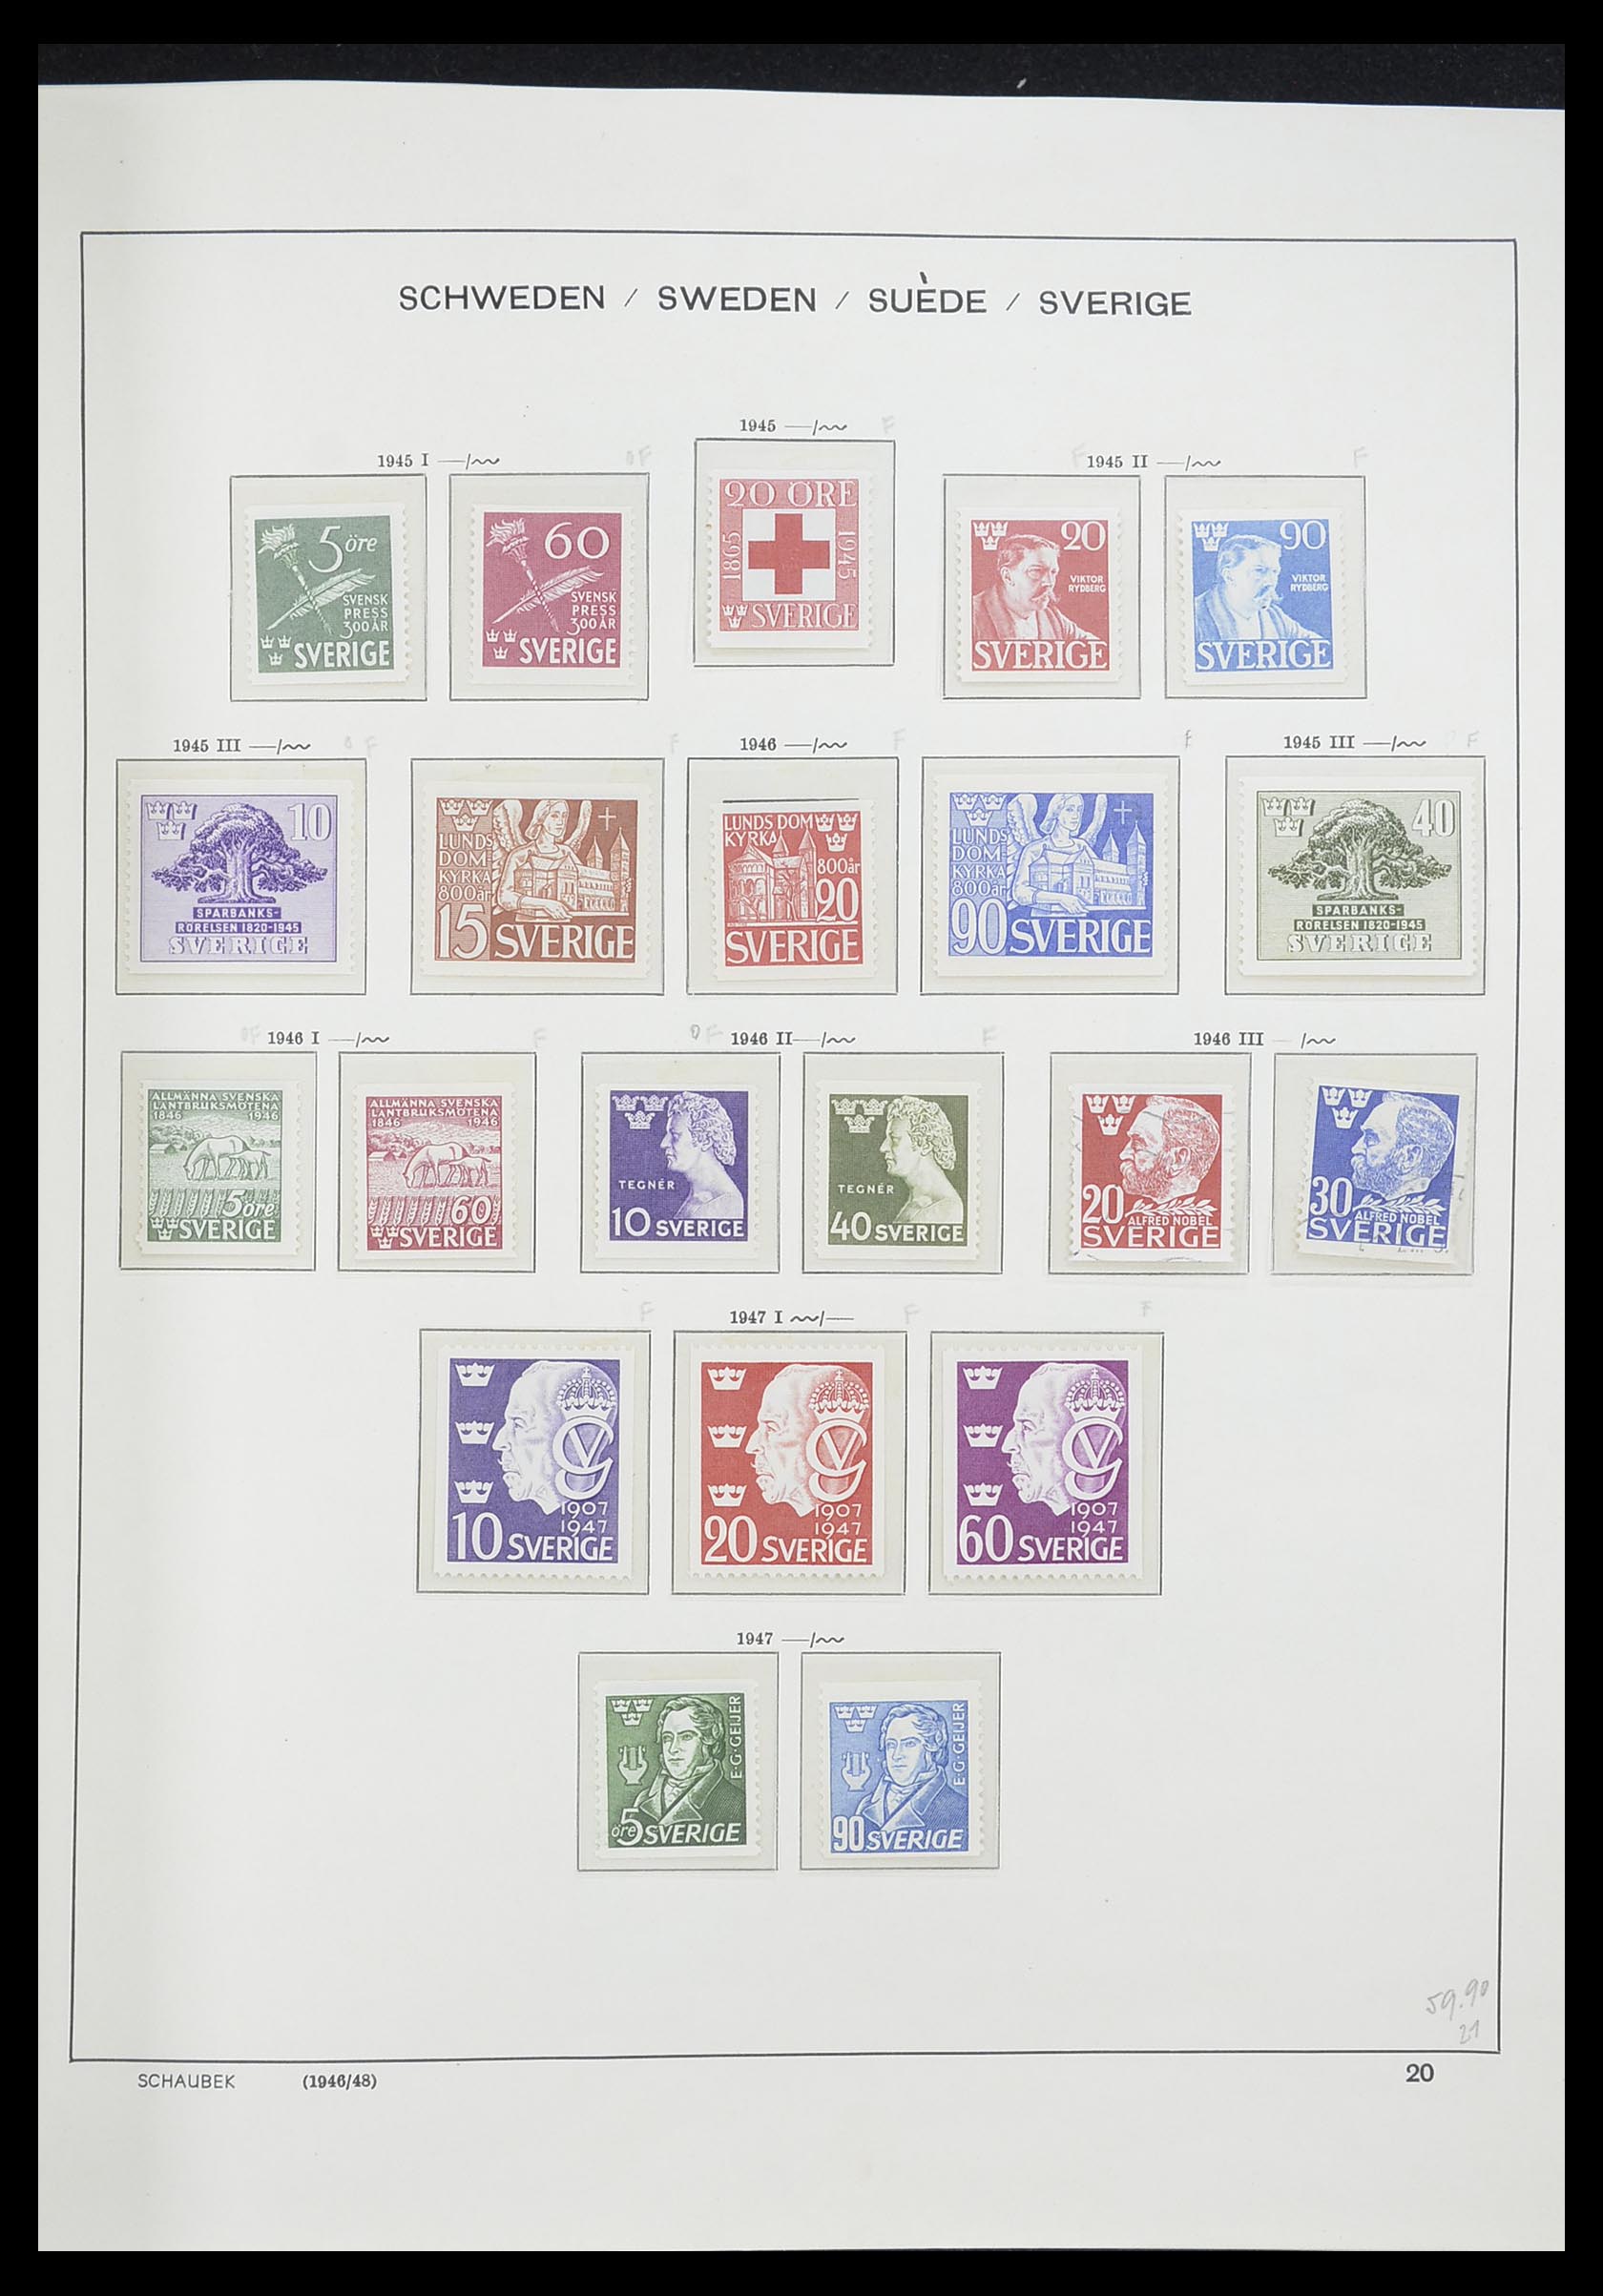 33293 033 - Stamp collection 33293 Sweden 1855-1996.